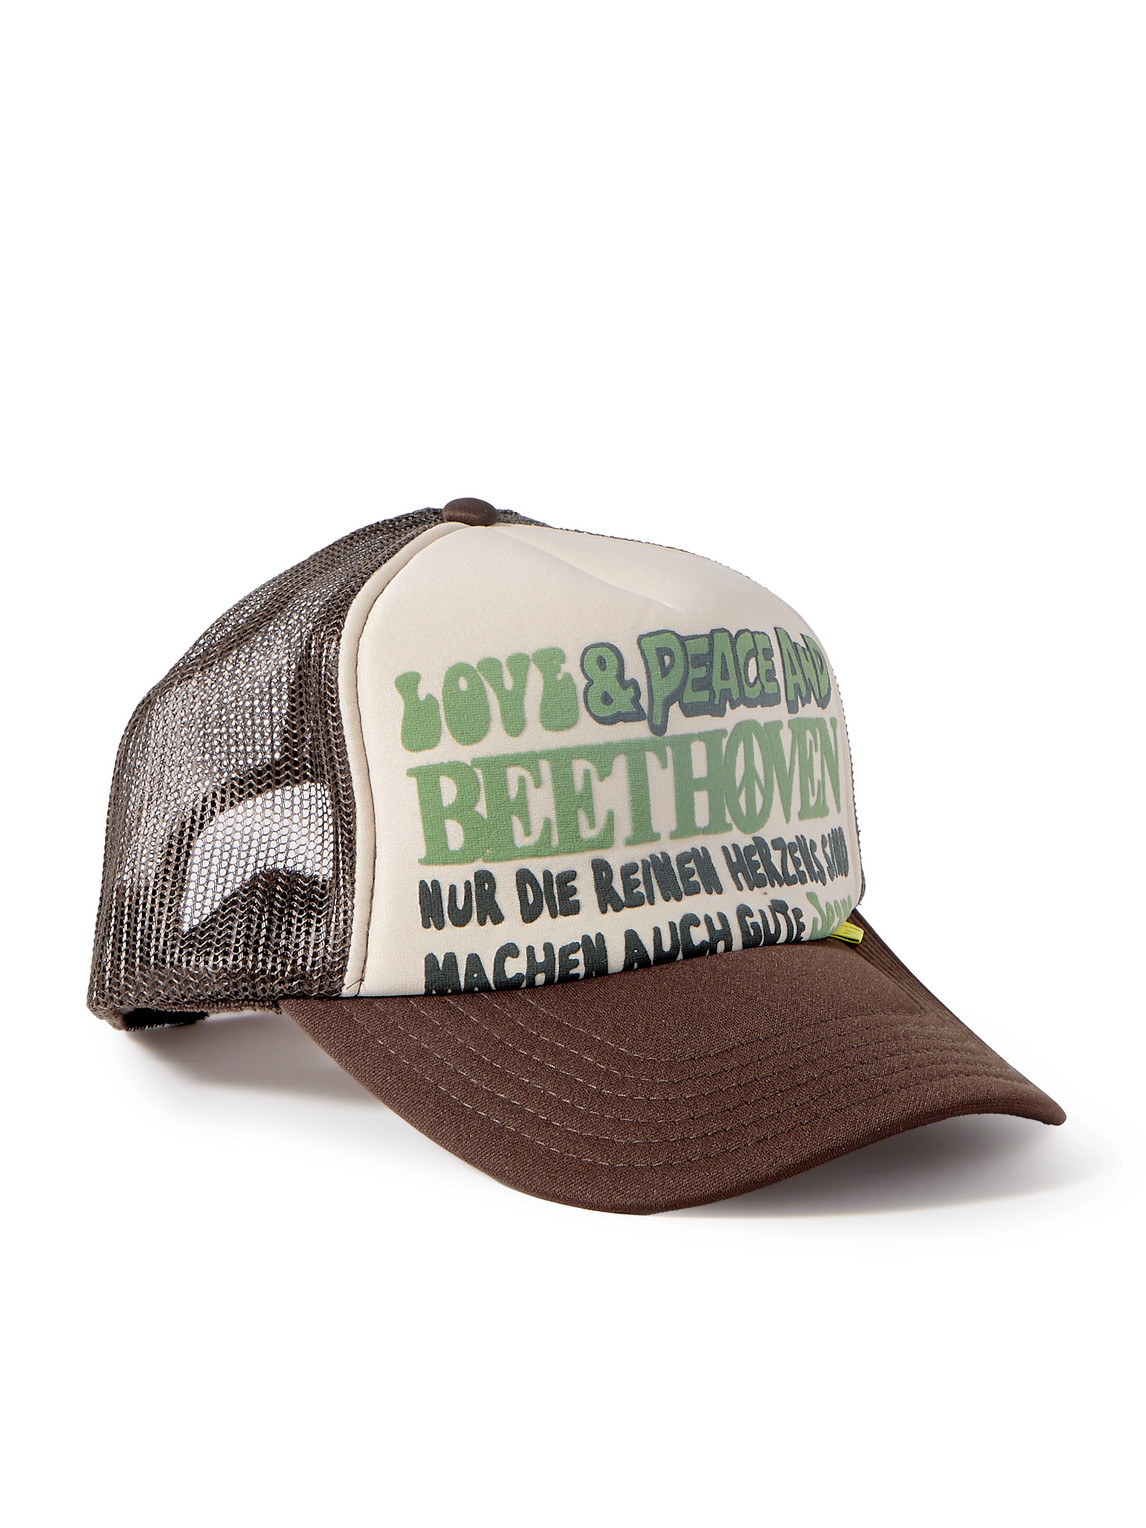 Love & Peace and Beethoven Printed Neoprene and Mesh Trucker Cap